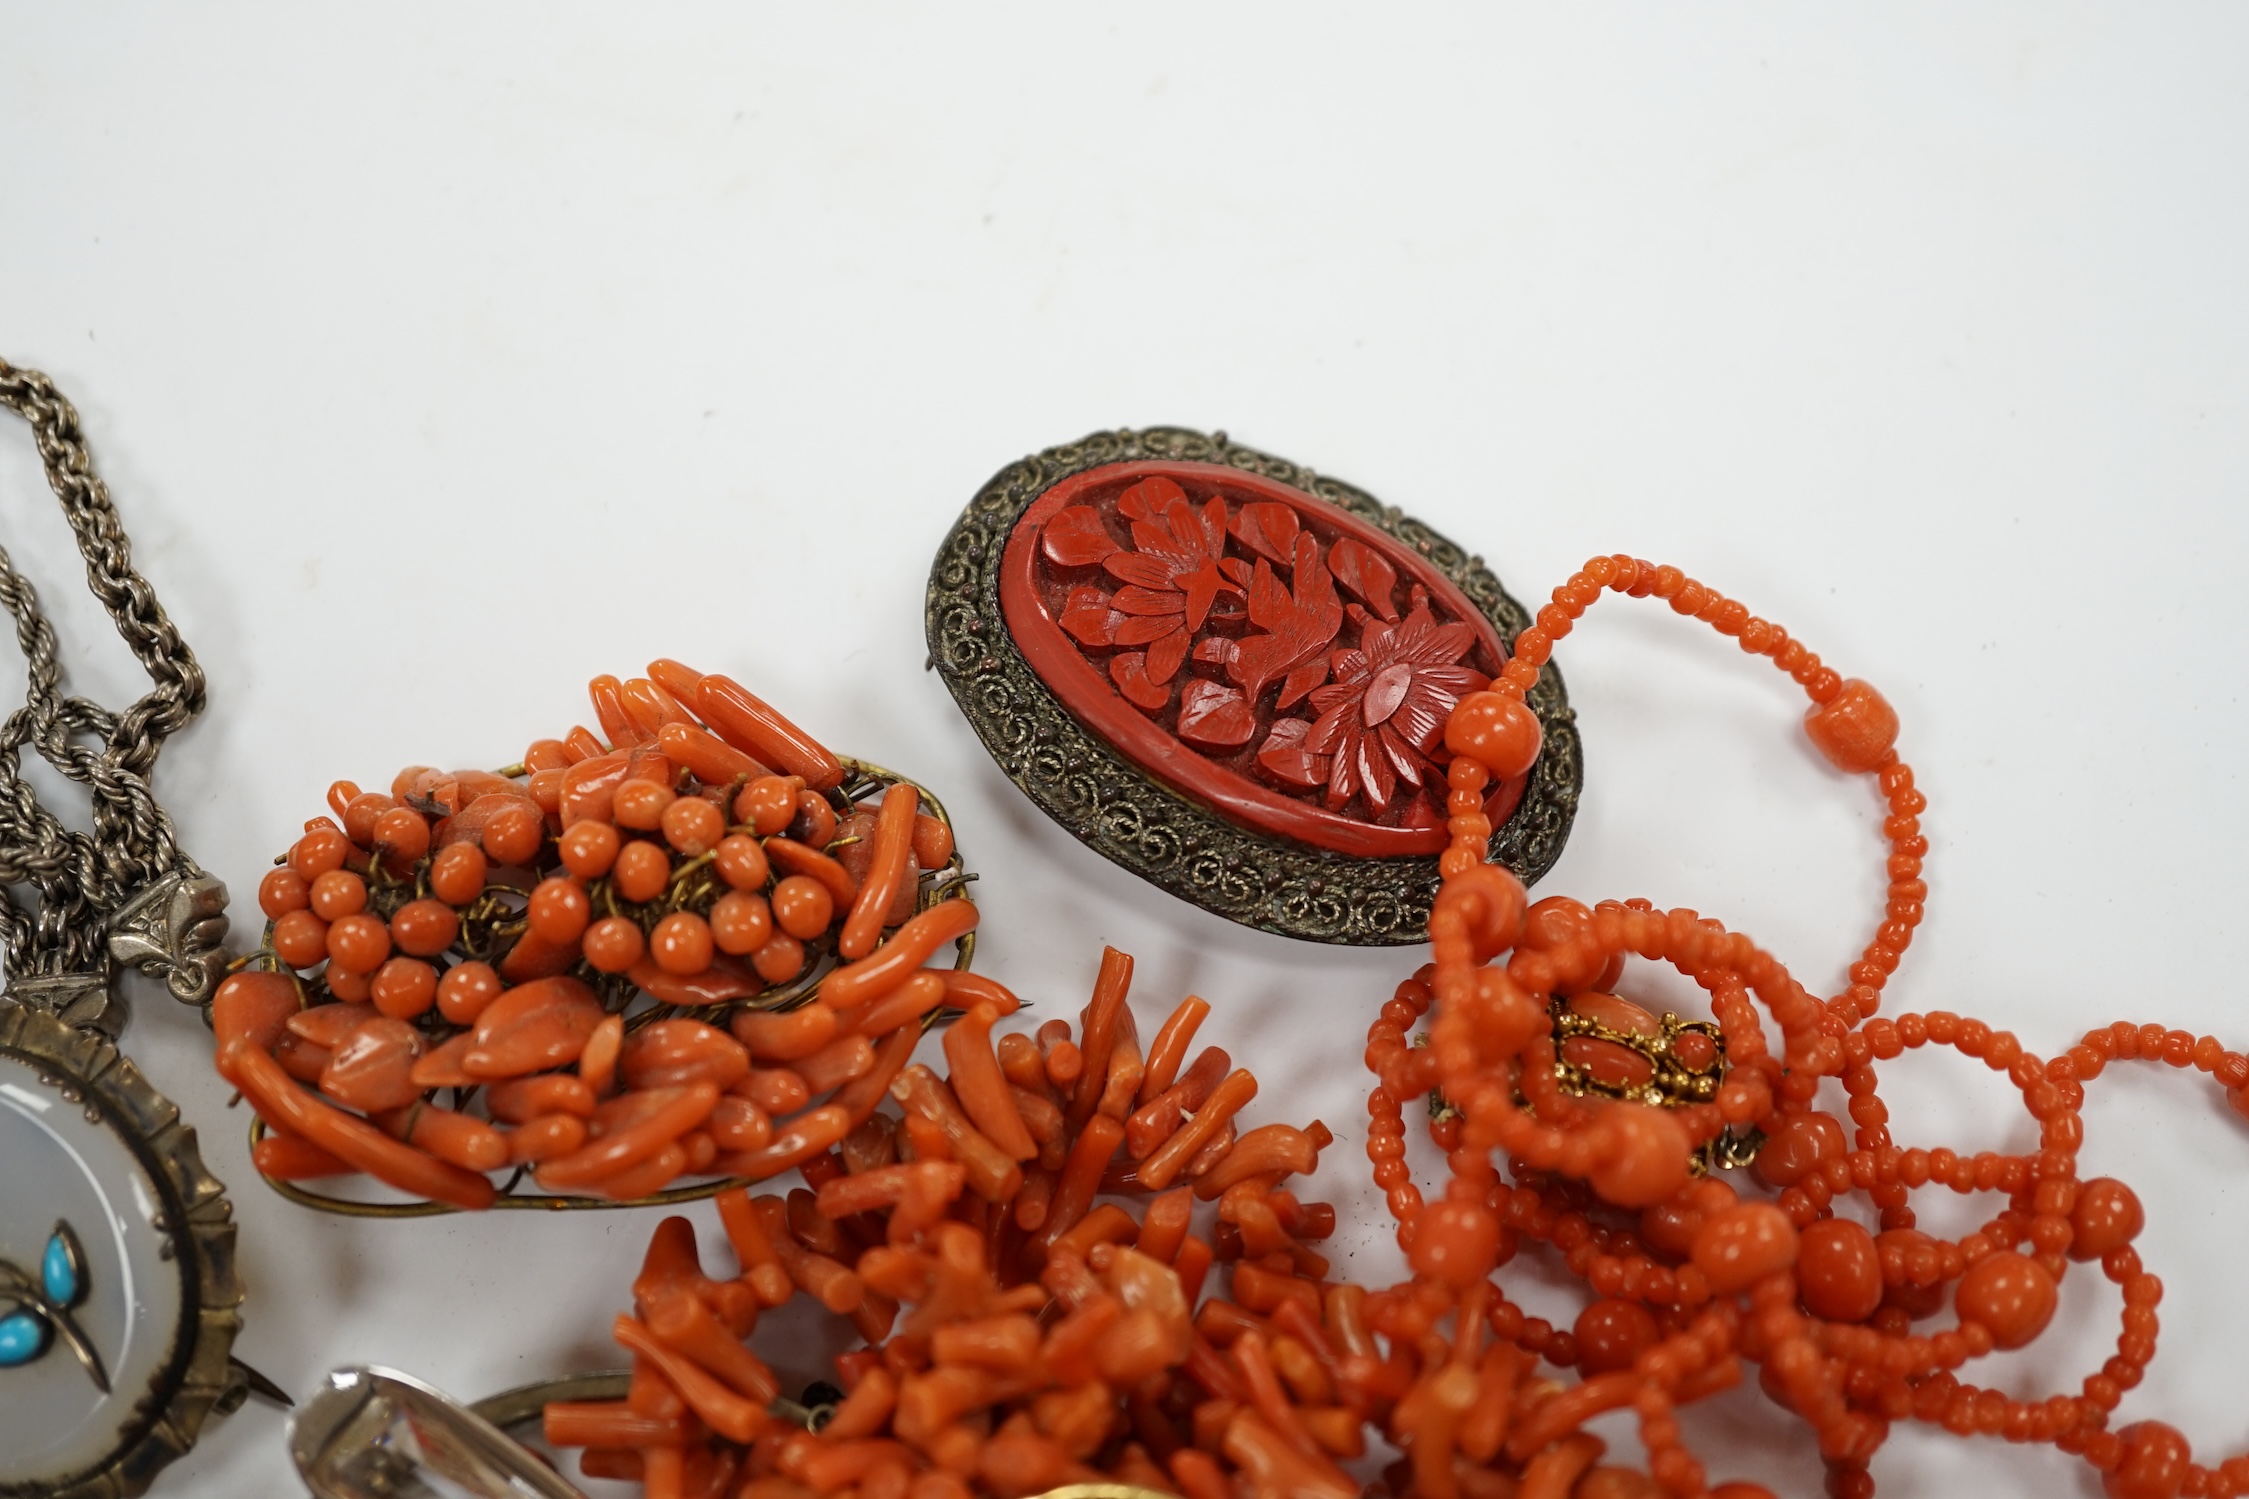 A group of assorted jewellery including costume, coral necklaces, chalcedony and turquoise set brooch, sterling bangle etc. Condition - poor to fair